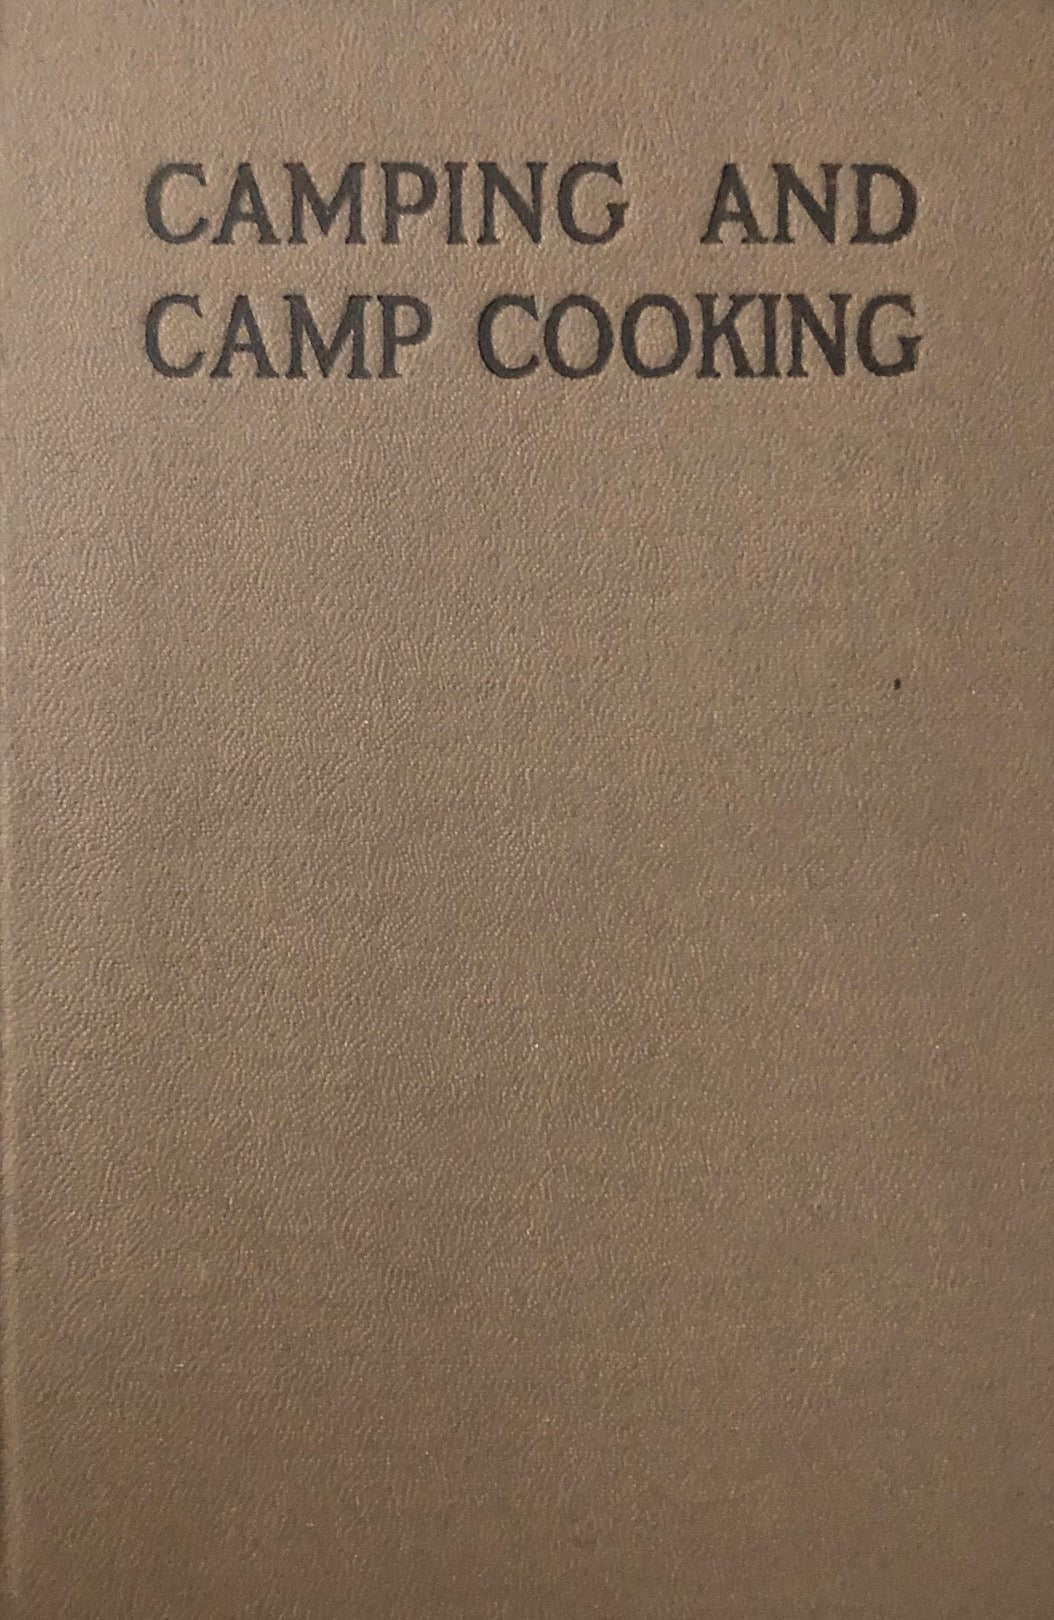 (*NEW ARRIVAL*) (Camping) Frank A. Bates. Camping and Camp Cooking.